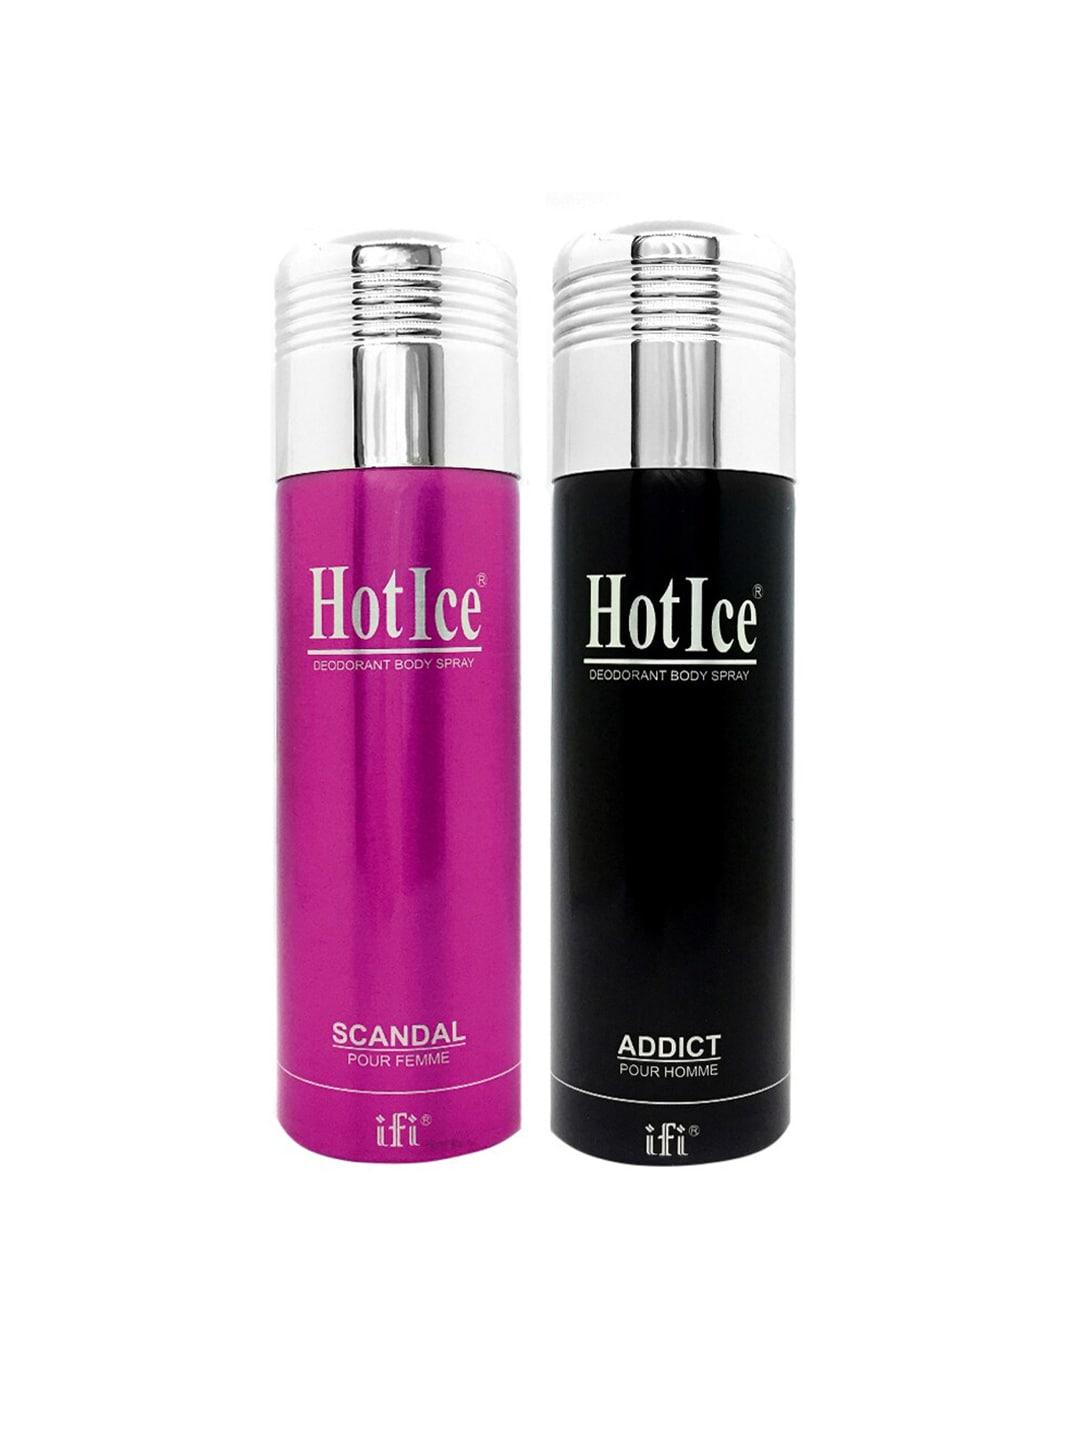 Hot Ice Scandal Fomme & Addict Homme Deodorant - 200ml Each